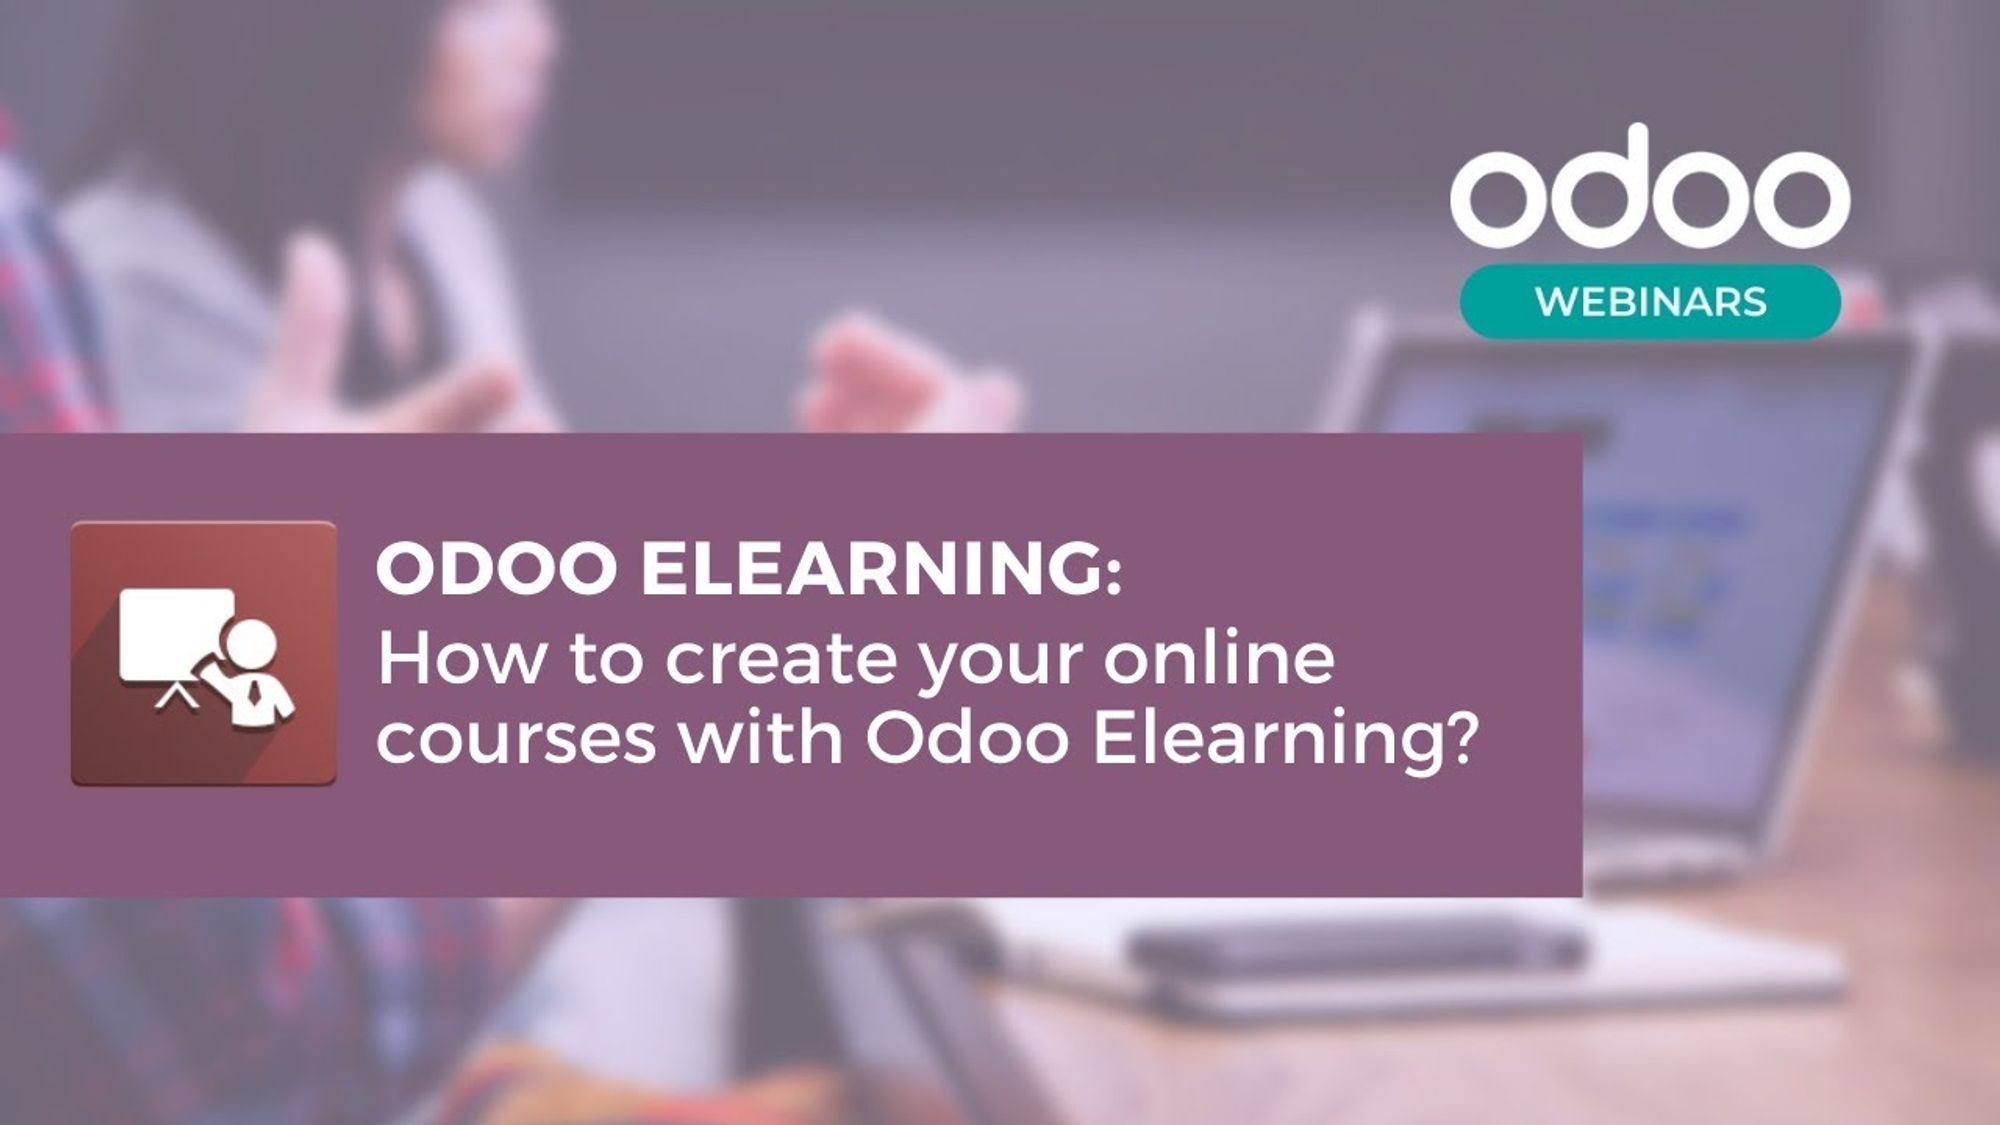 How to create your online courses with Odoo Elearning